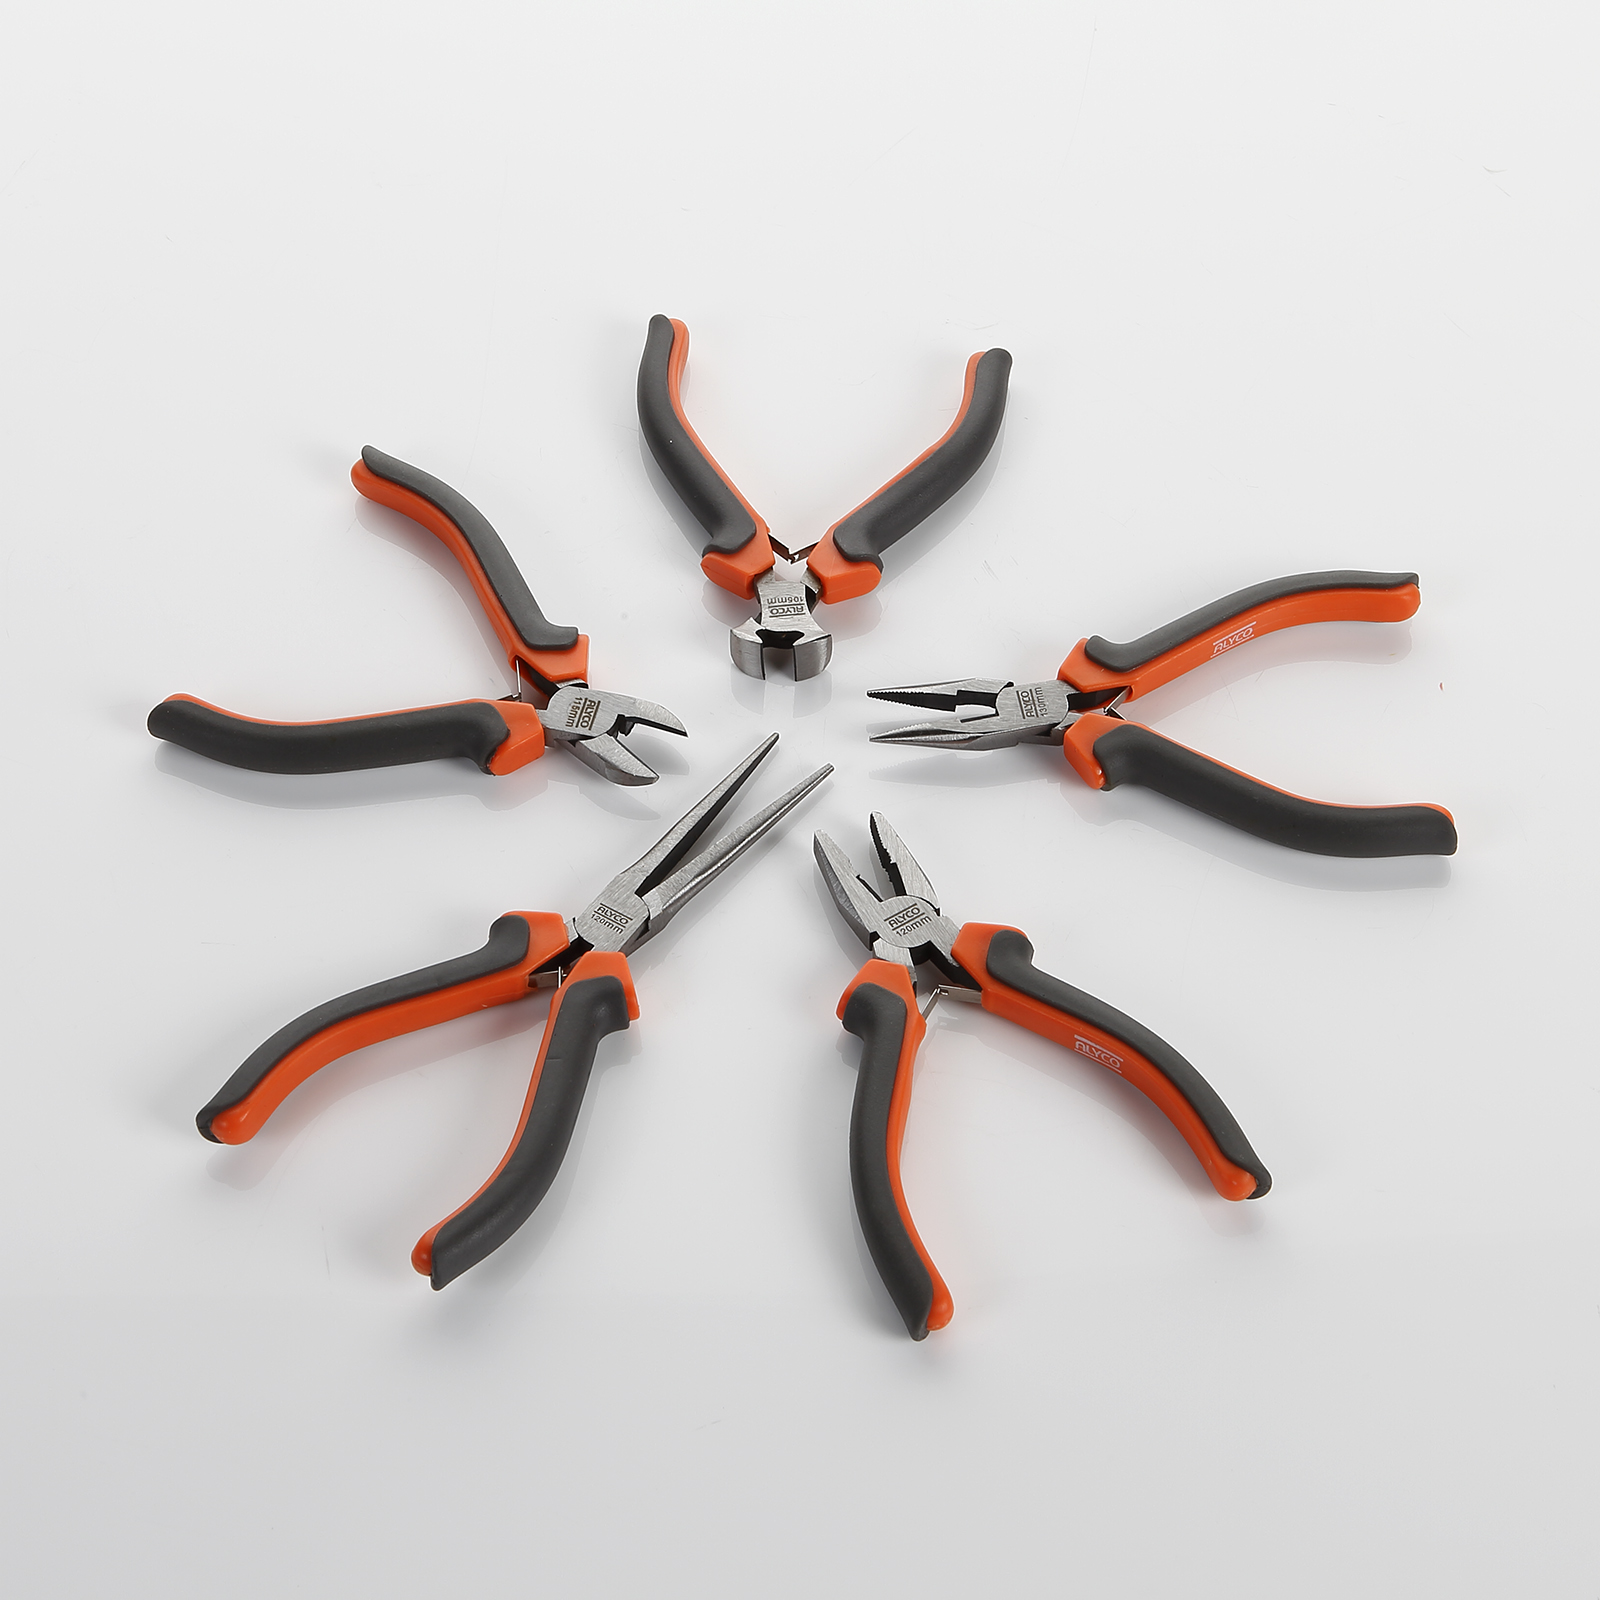 Precision Pliers – What Do You Use Them For?